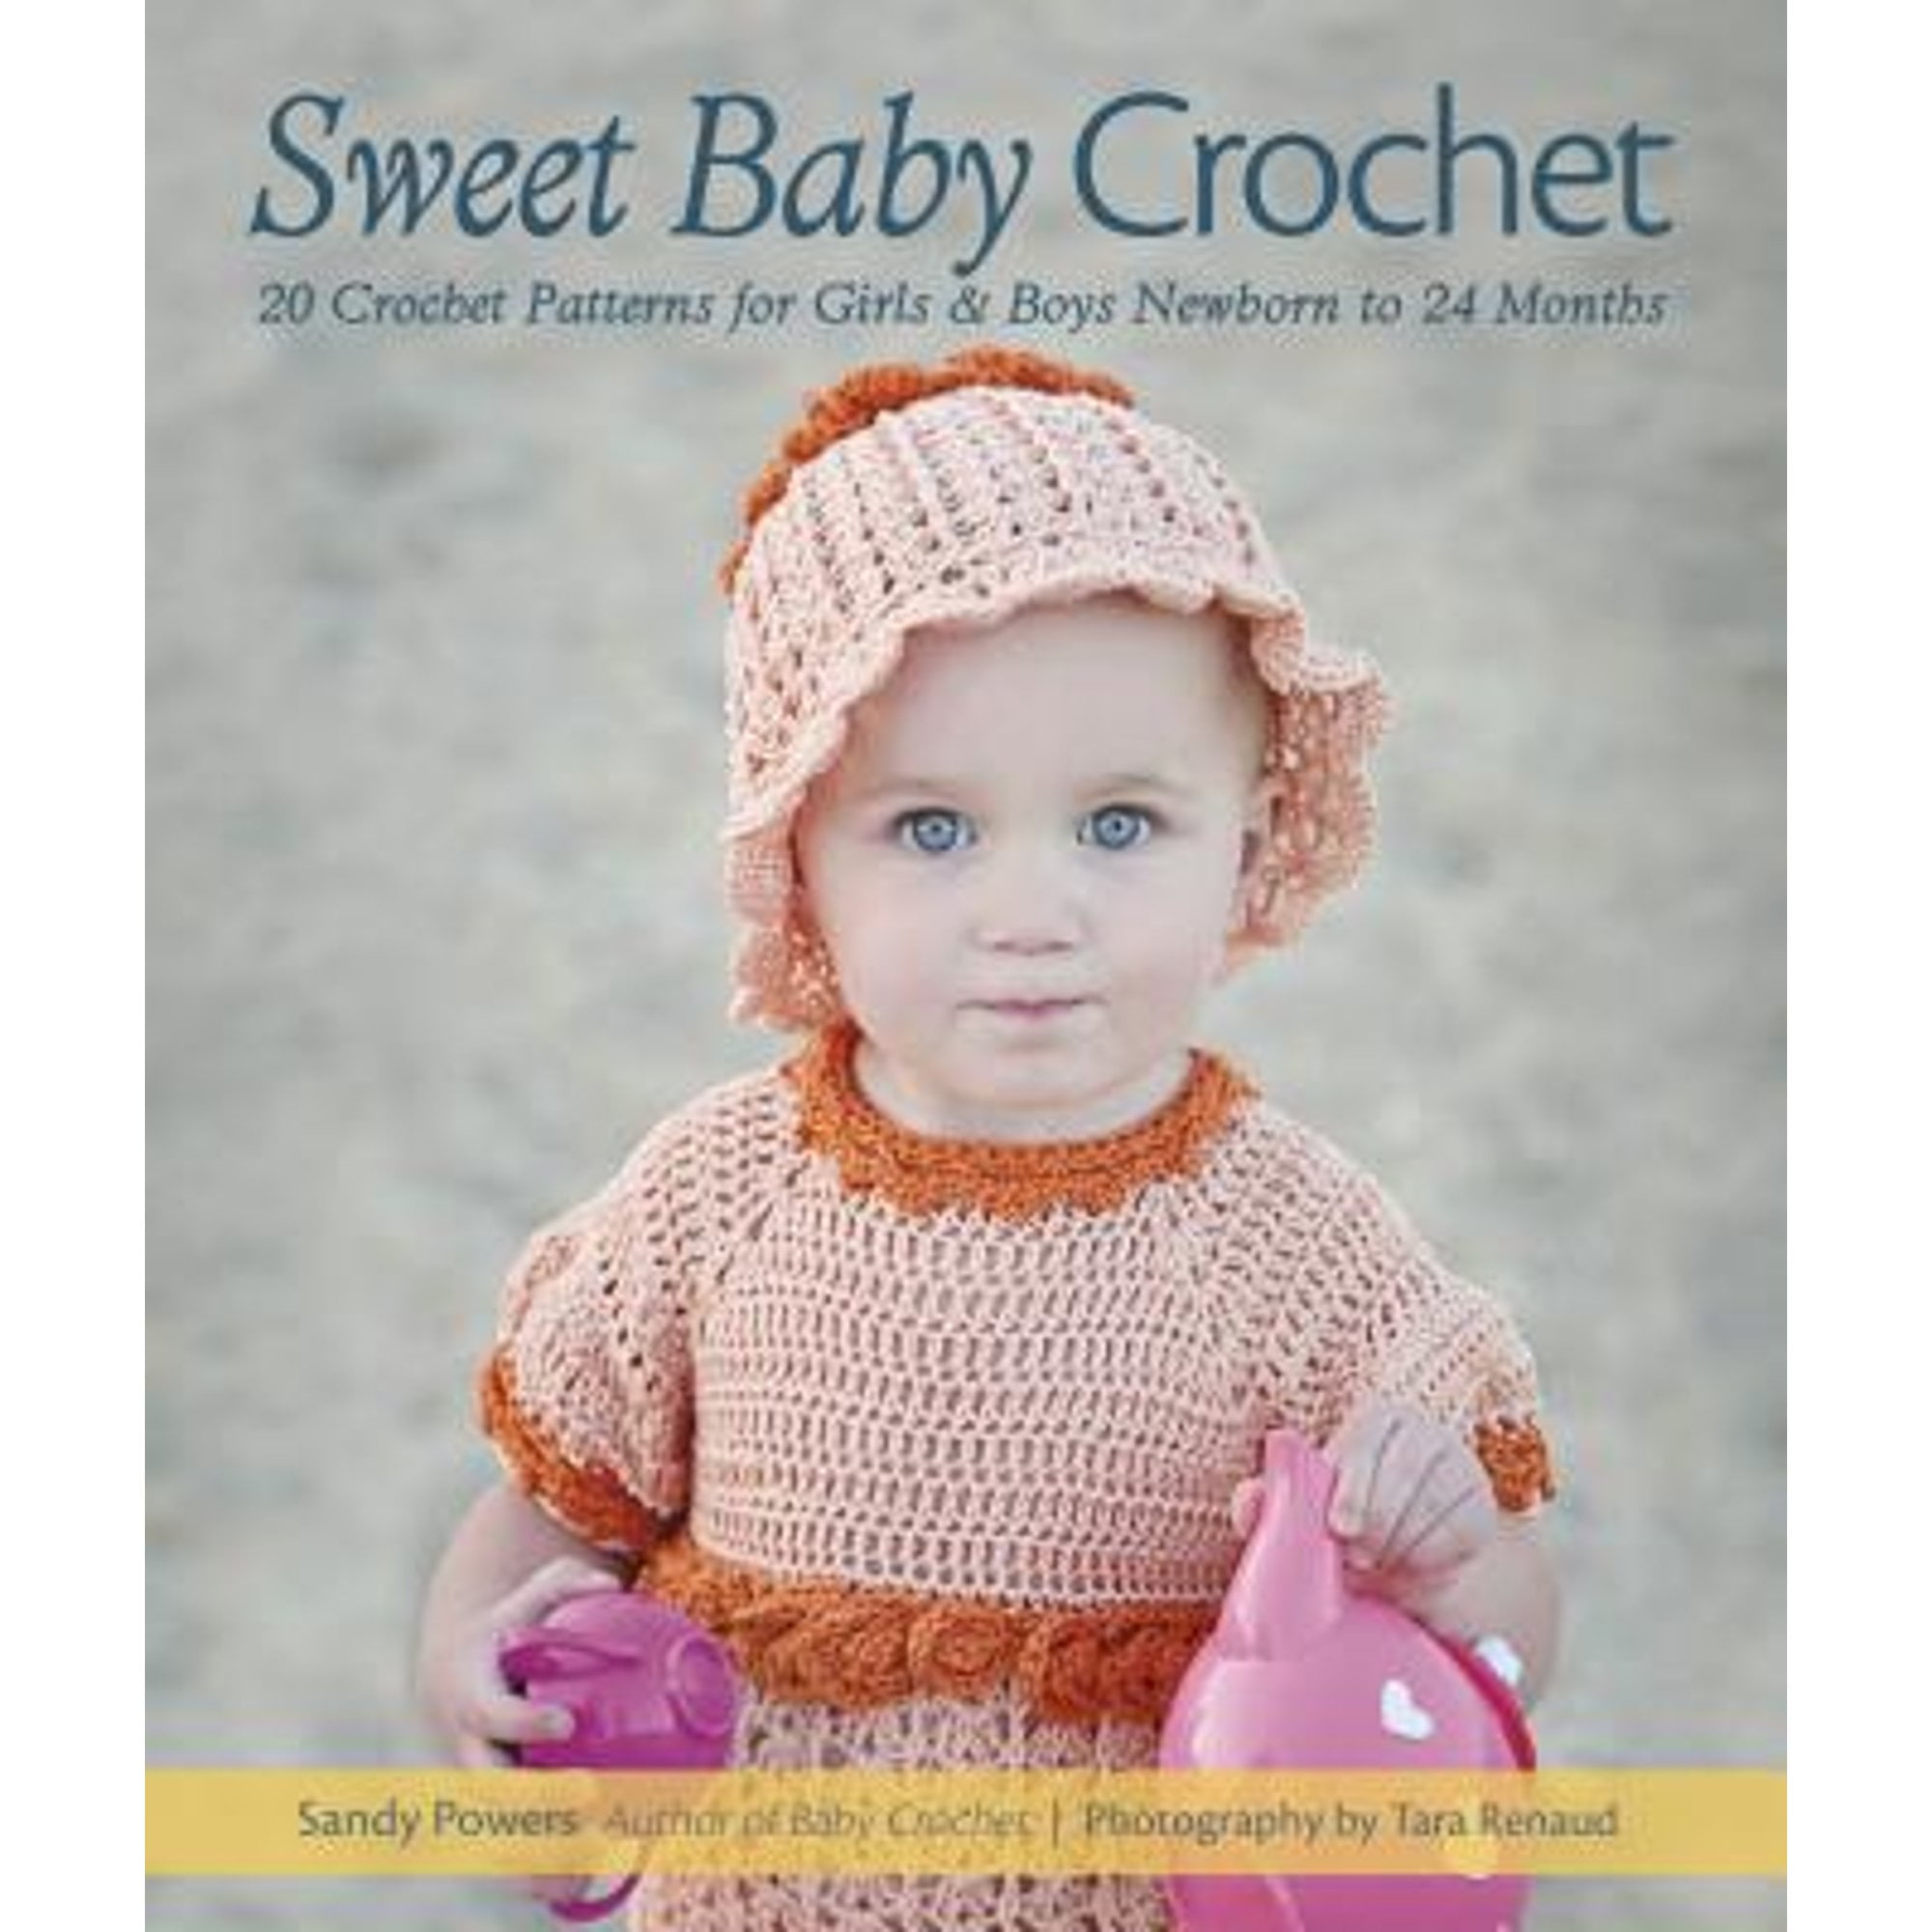 Crochet for Kids Book Everyday Crafting 70 Plus Patterns Rugs Pillow Animals